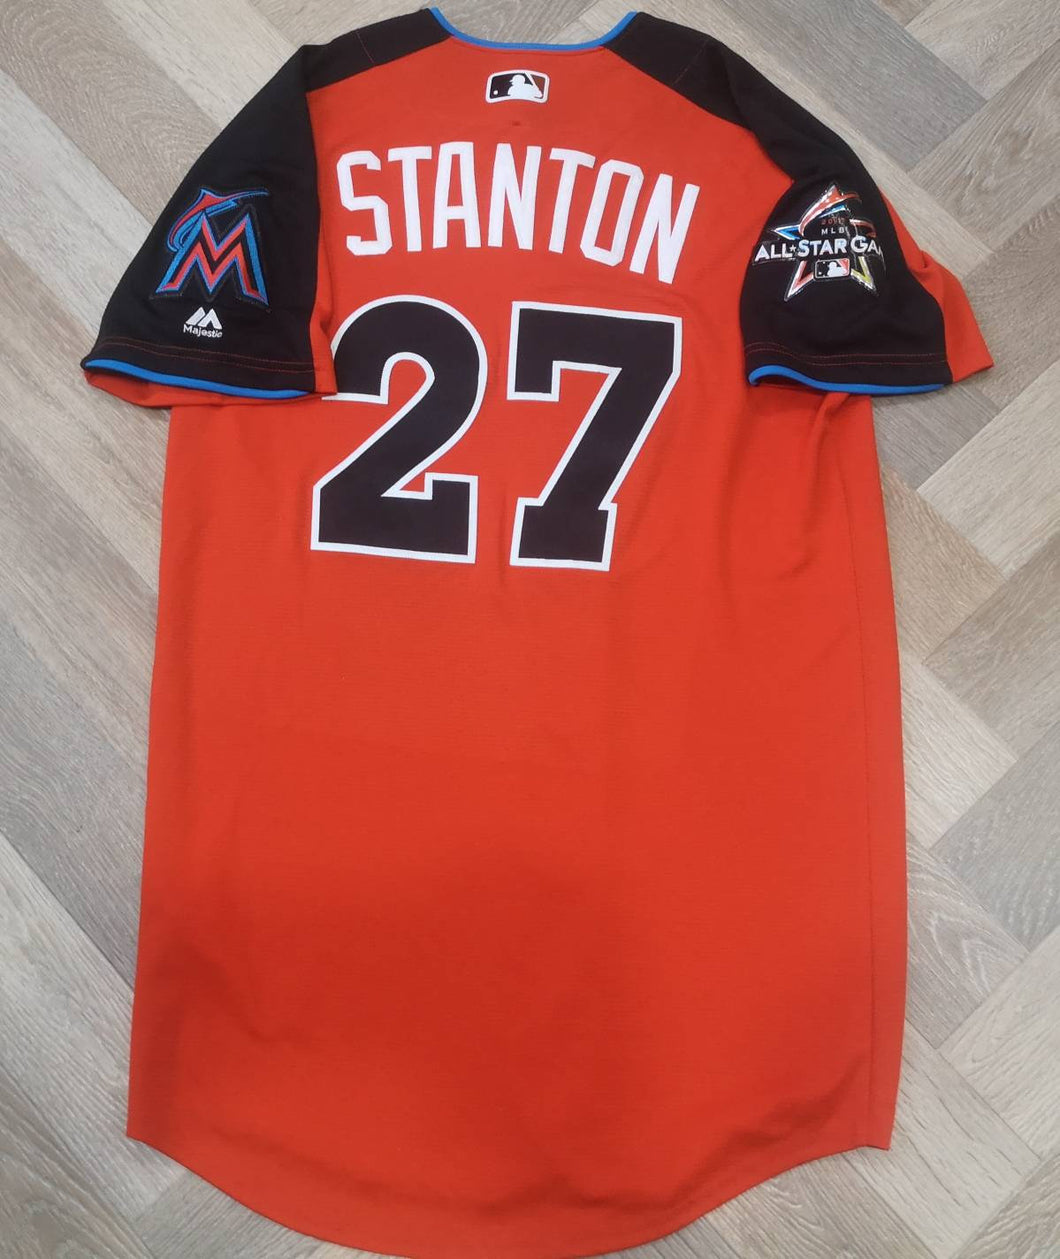 Authentic jersey Giancarlo Stanton #27 Miami Marlins MLB All Star 2017 Majestic